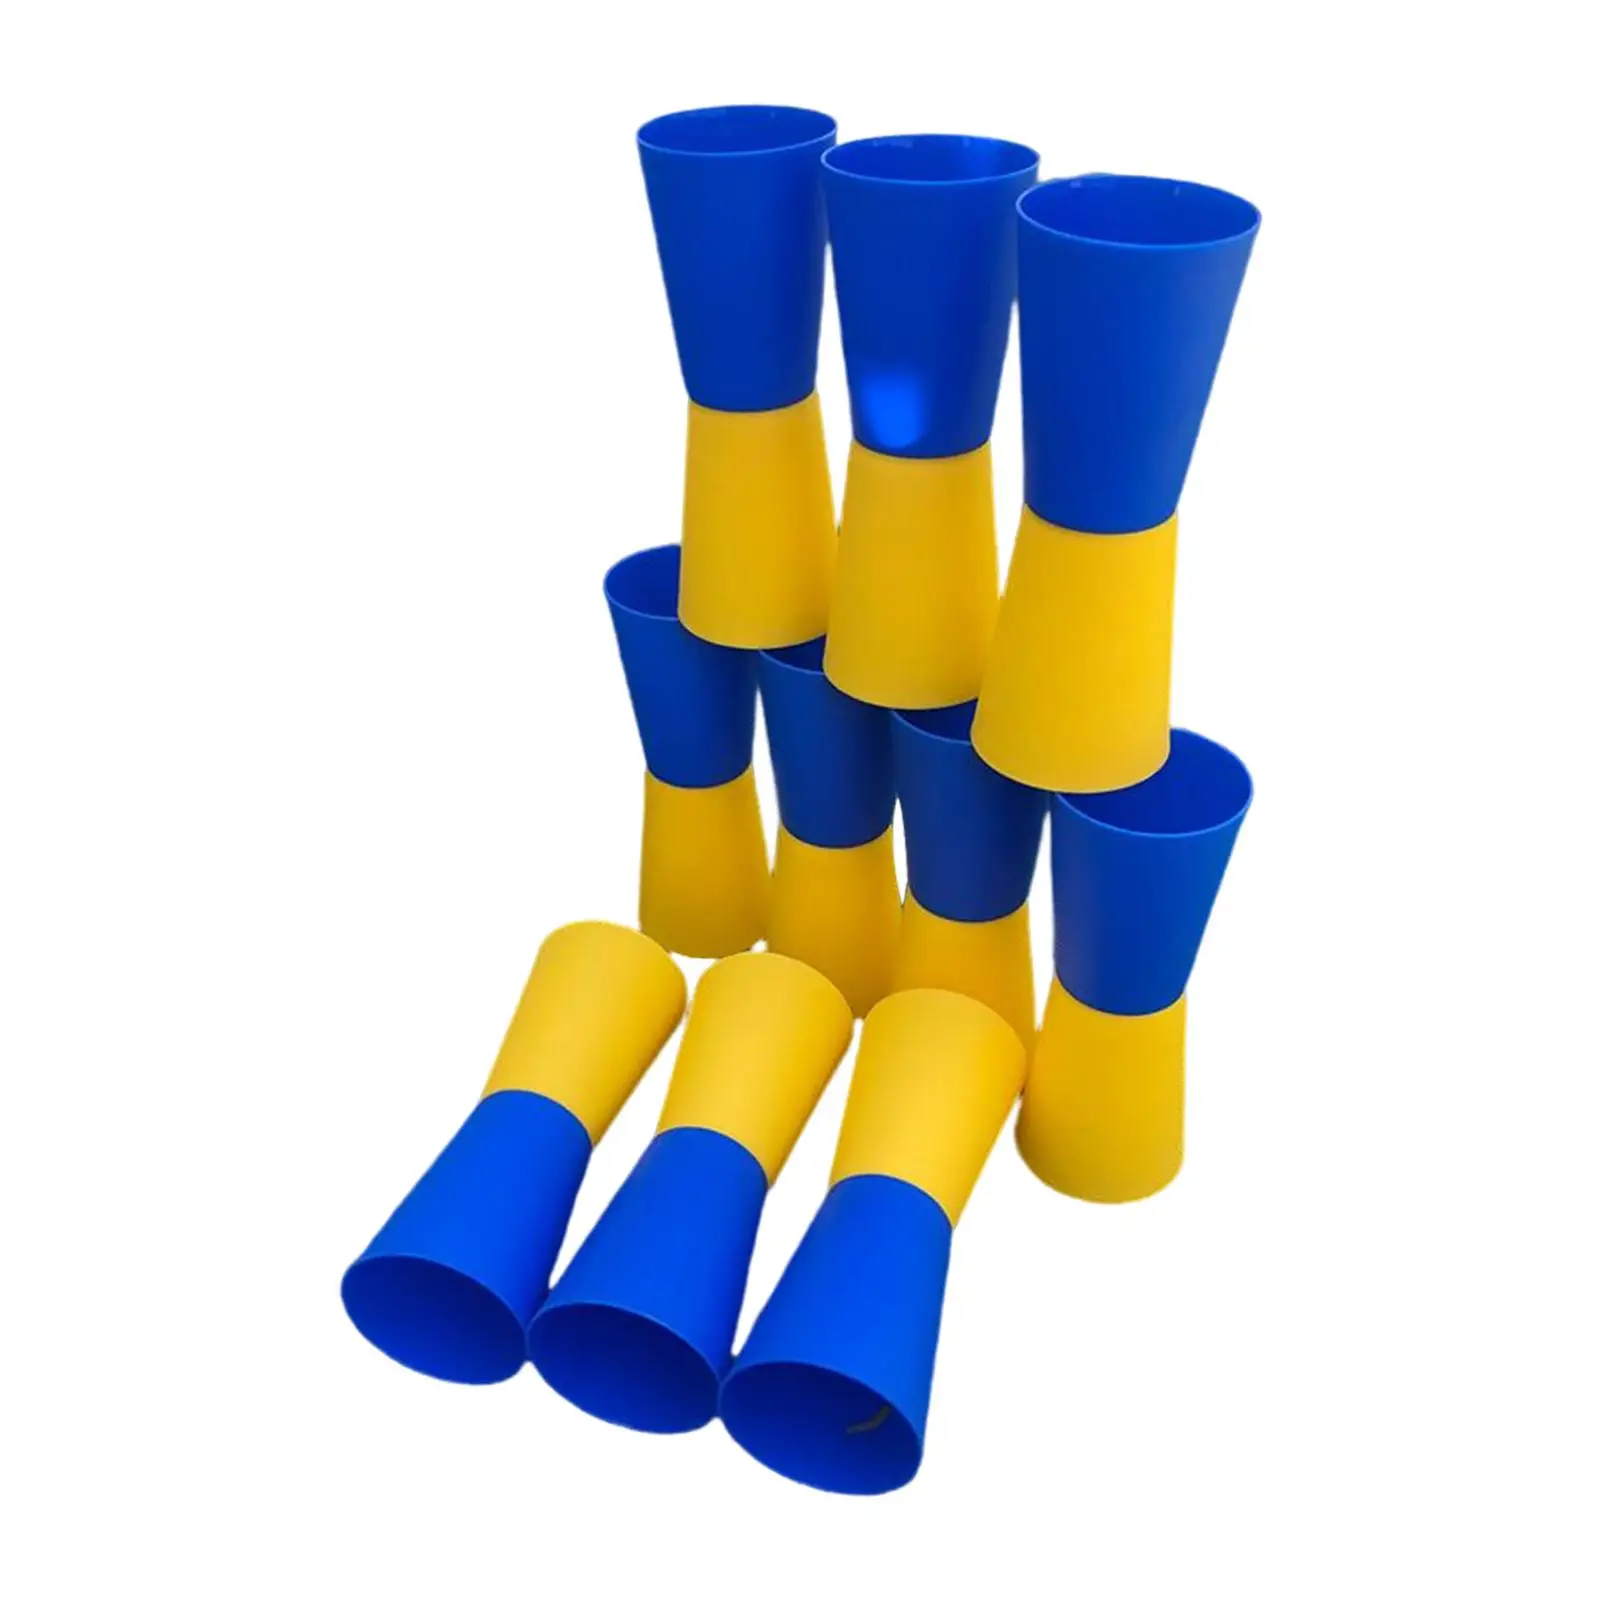 10x Cups Speed Agility Training Exercise Sensory Integration Running Aid  Cups